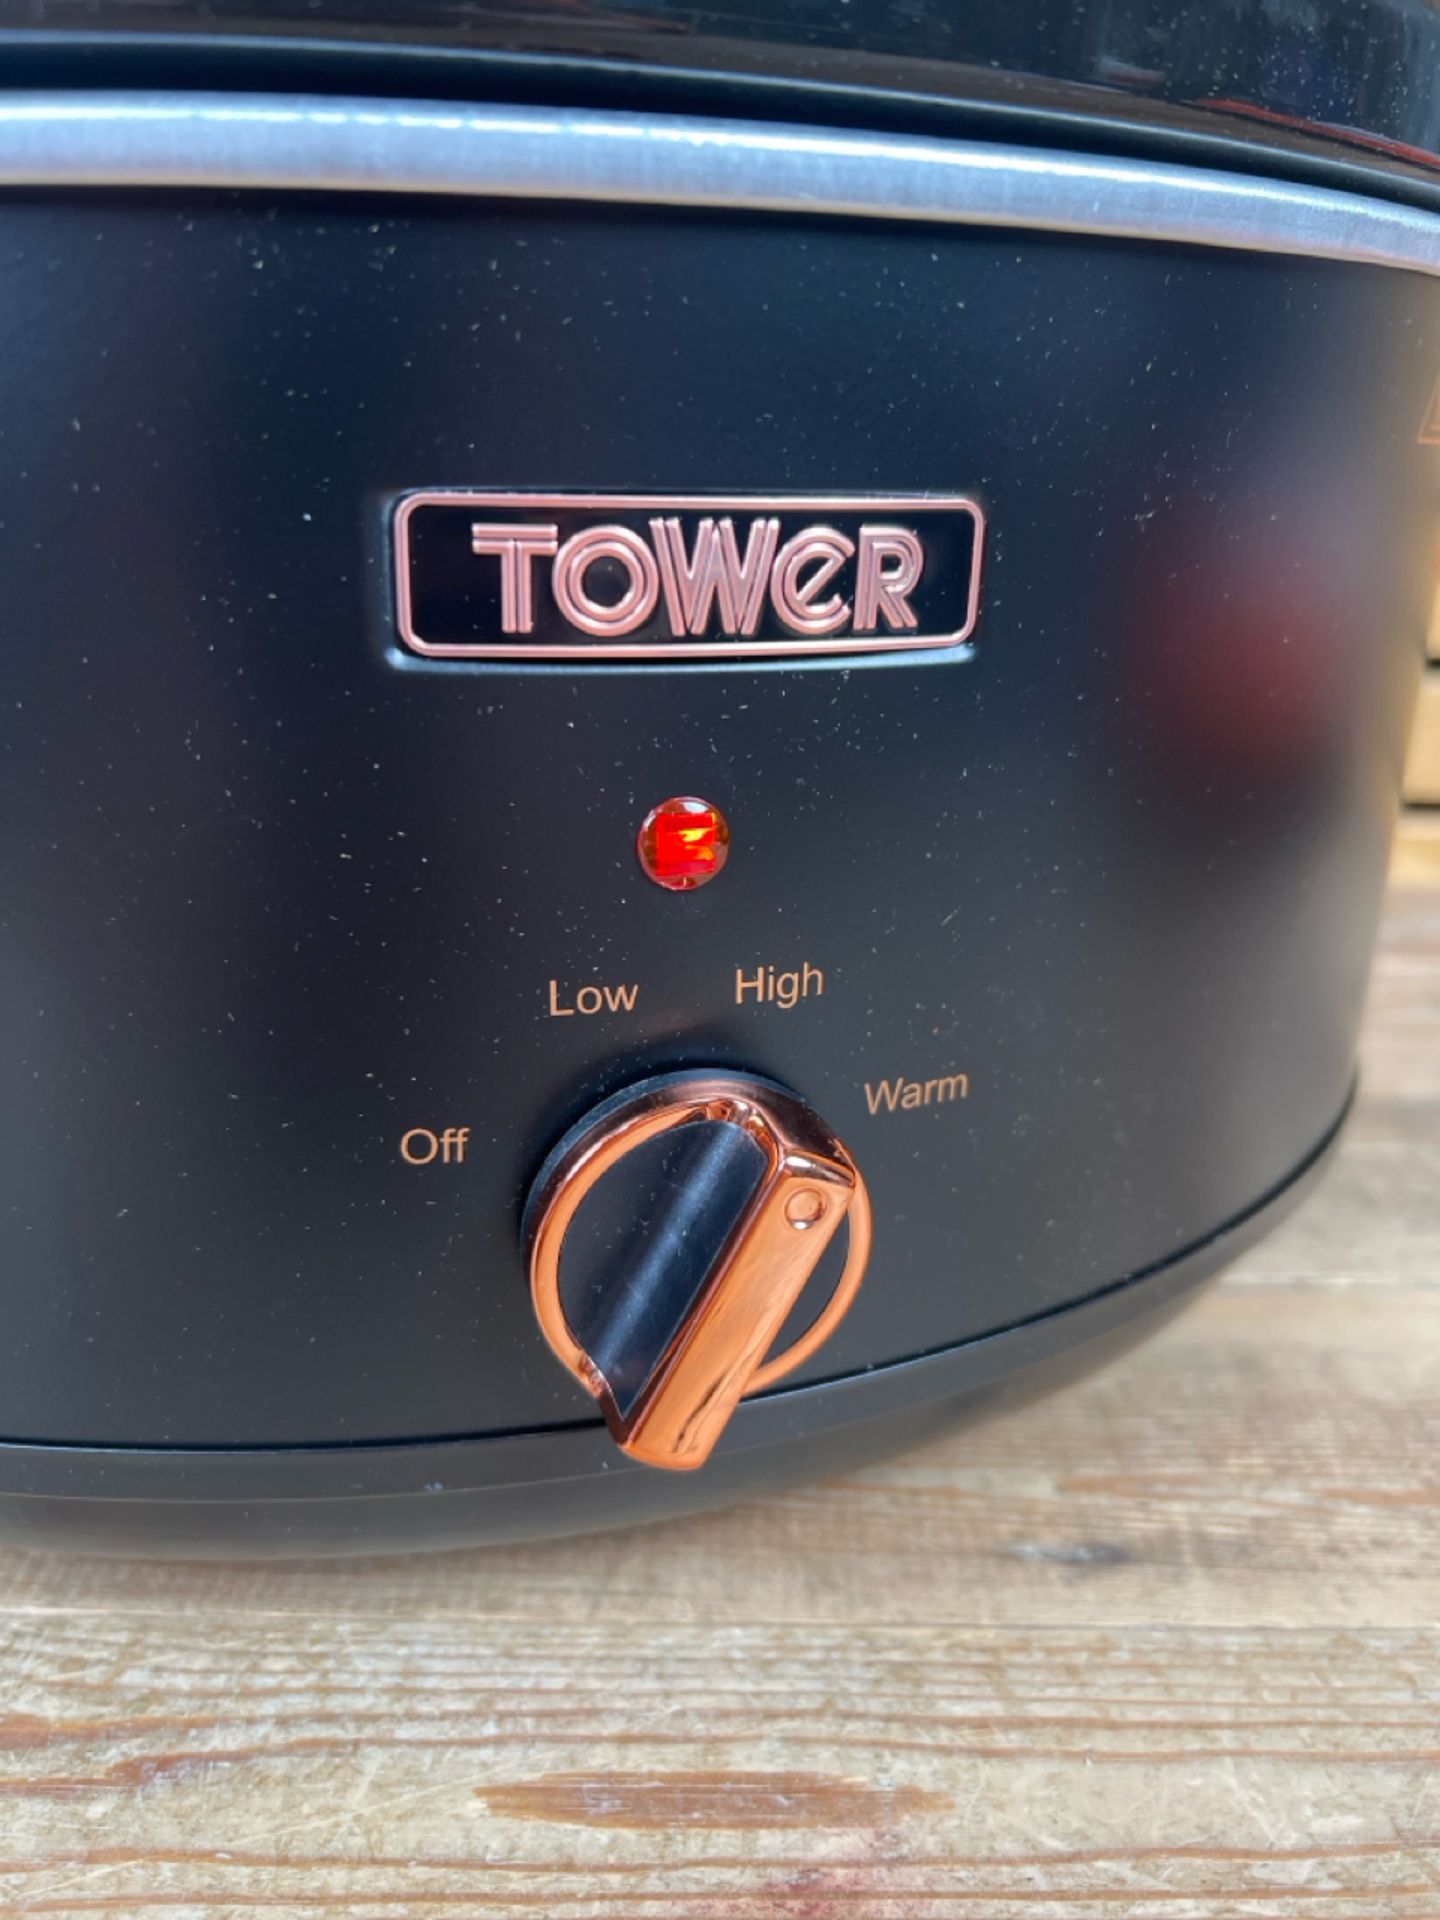 Tower Cavaletto Rose Gold Edition 6.5Litre Black Slow Cooker - Image 3 of 4